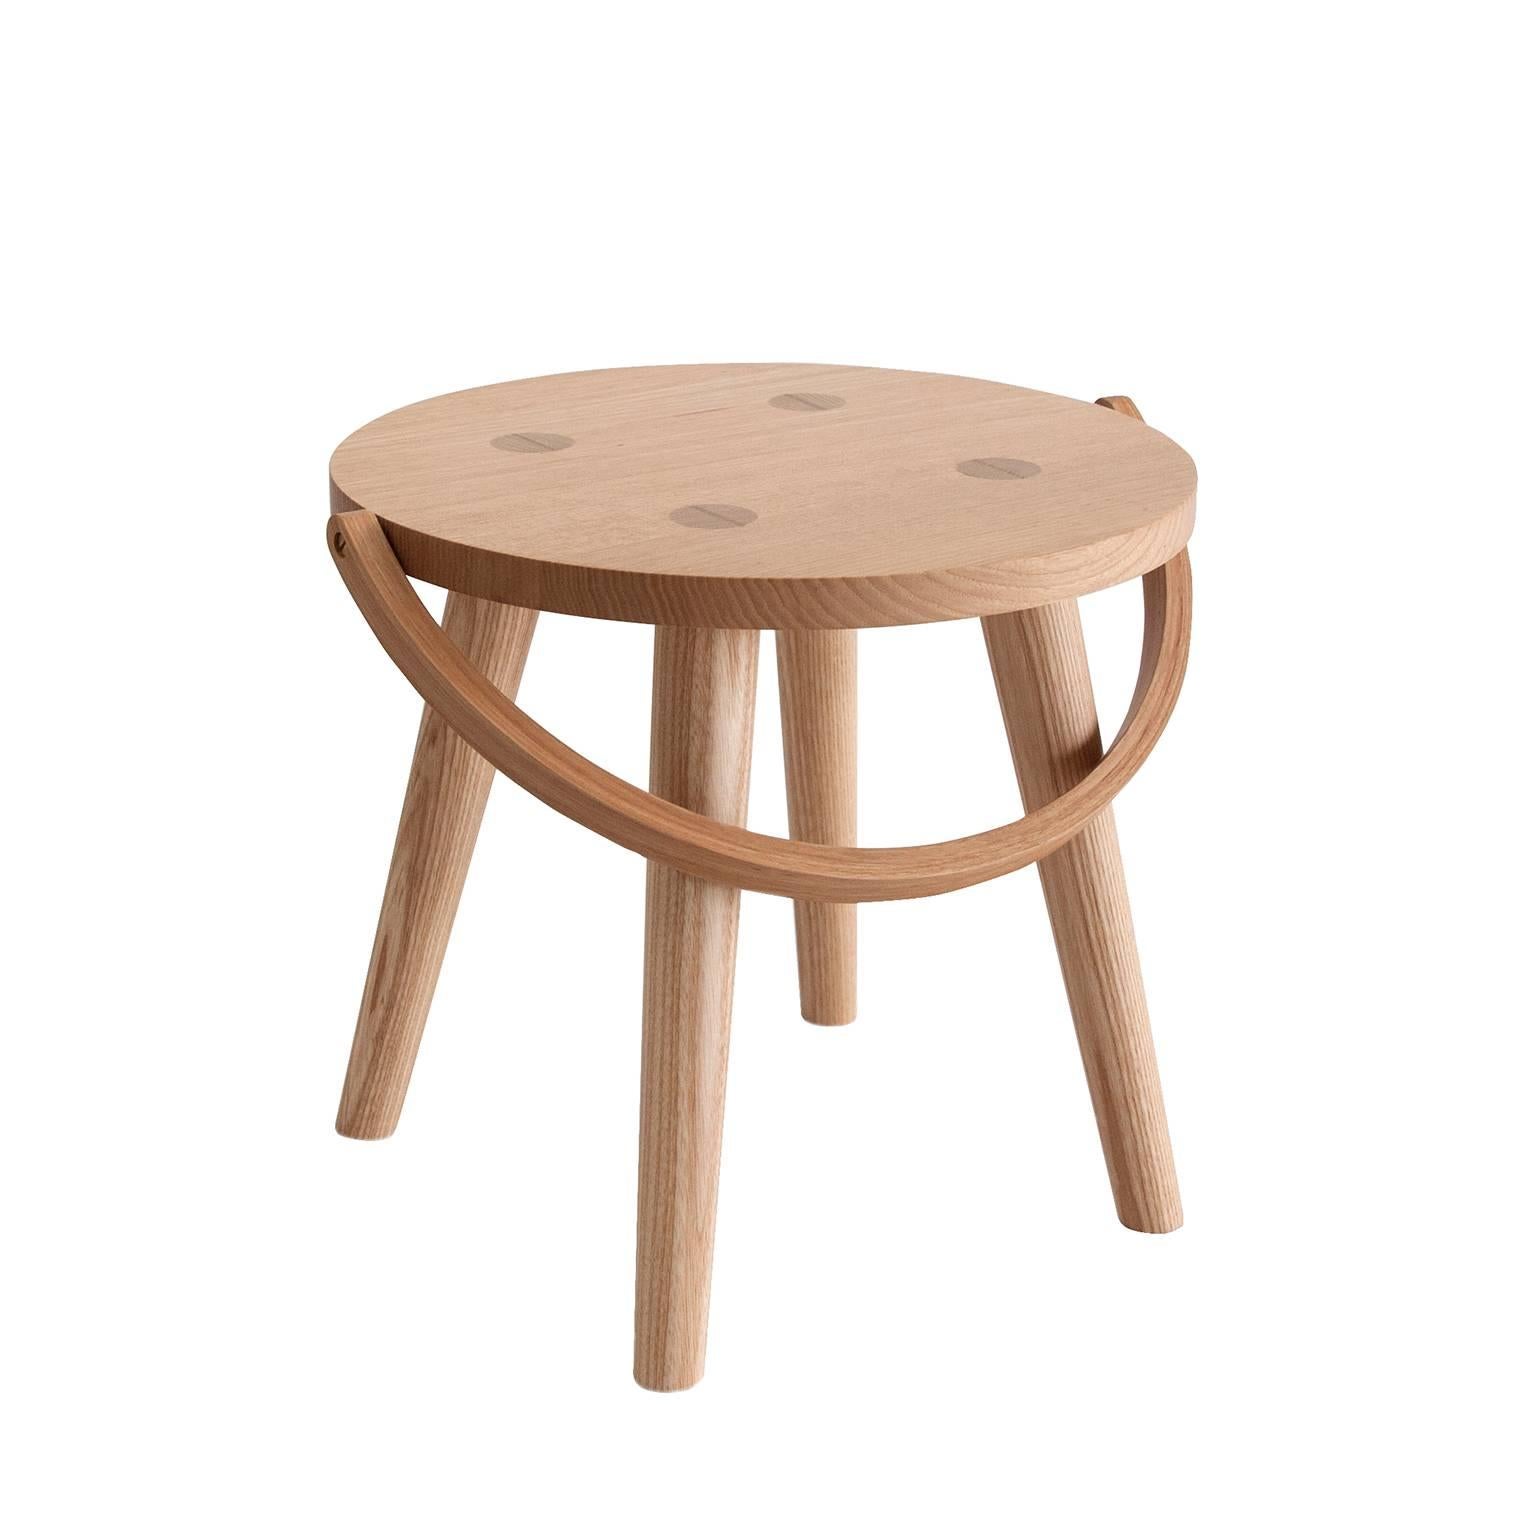 The Step Bucket Stool is a single sized, low seat, or step stool, and the smallest of four versions from the Bucket Stool Collection, a family of solid ash furniture featuring bentwood handles. These versatile pieces can function as either a seat or